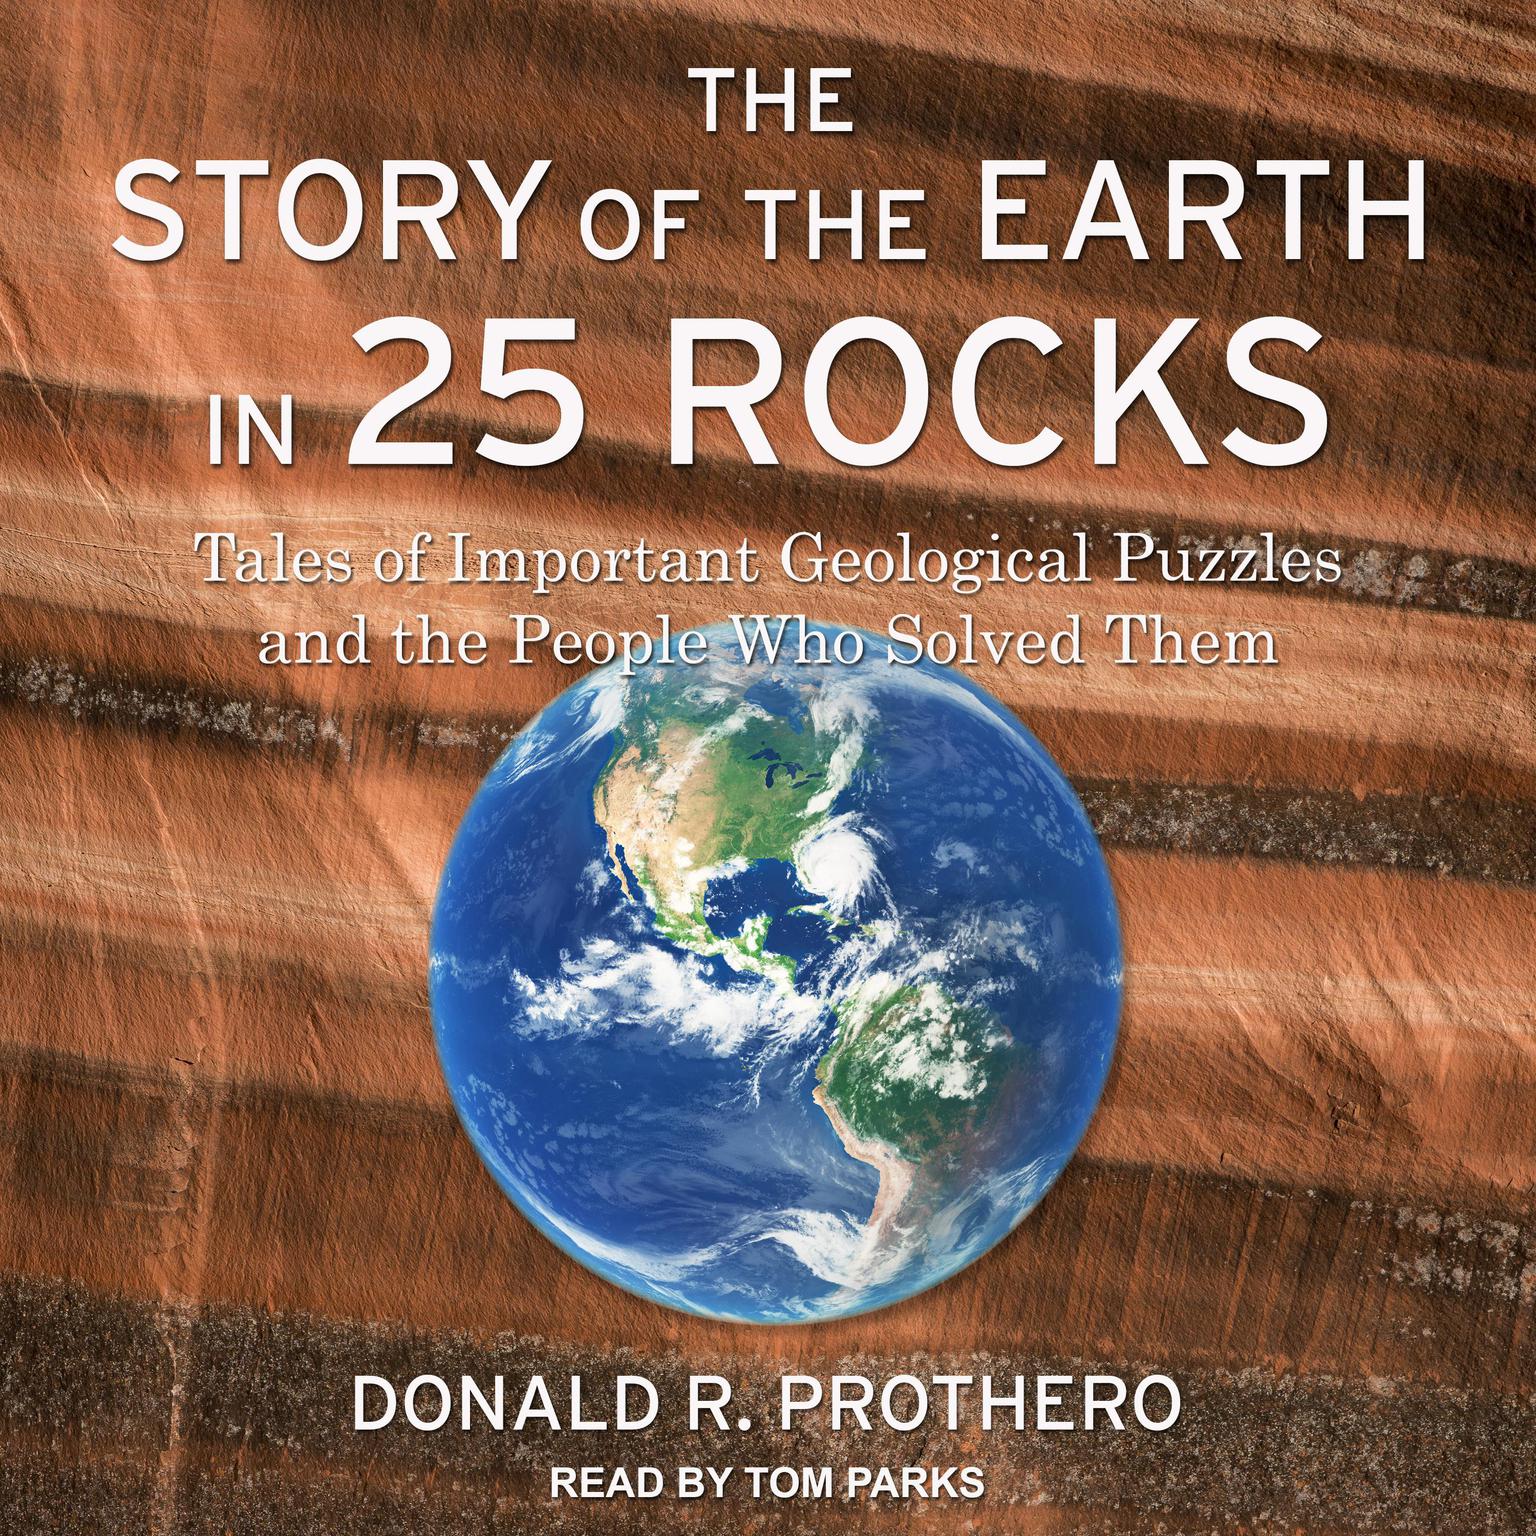 The Story of the Earth in 25 Rocks: Tales of Important Geological Puzzles and the People Who Solved Them Audiobook, by Donald R. Prothero